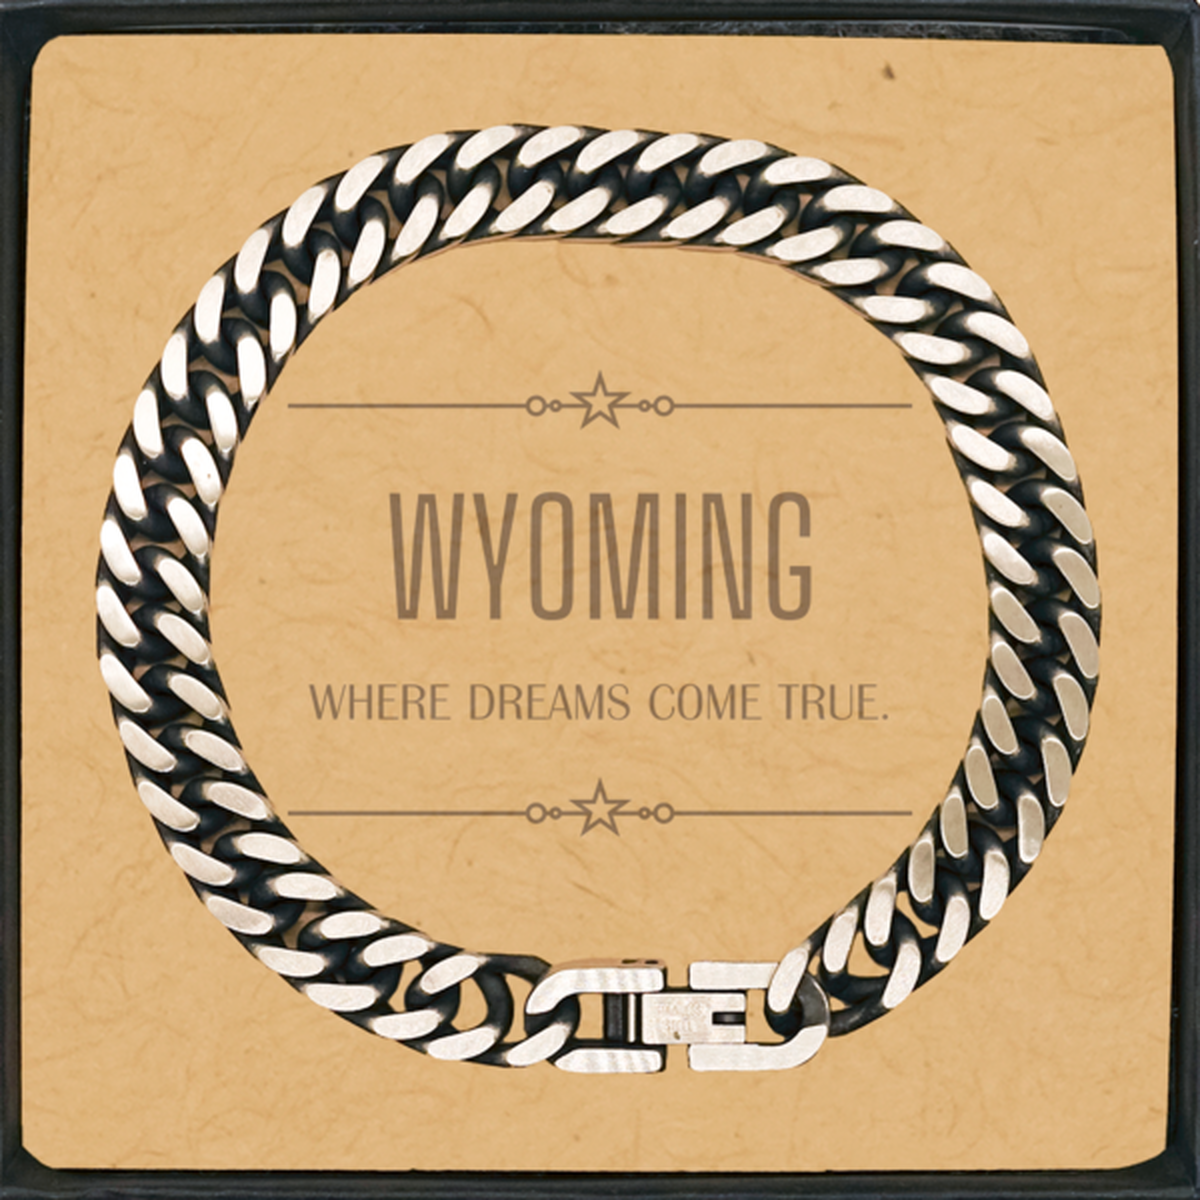 Love Wyoming State Cuban Link Chain Bracelet, Wyoming Where dreams come true, Birthday Inspirational Gifts For Wyoming Men, Women, Friends